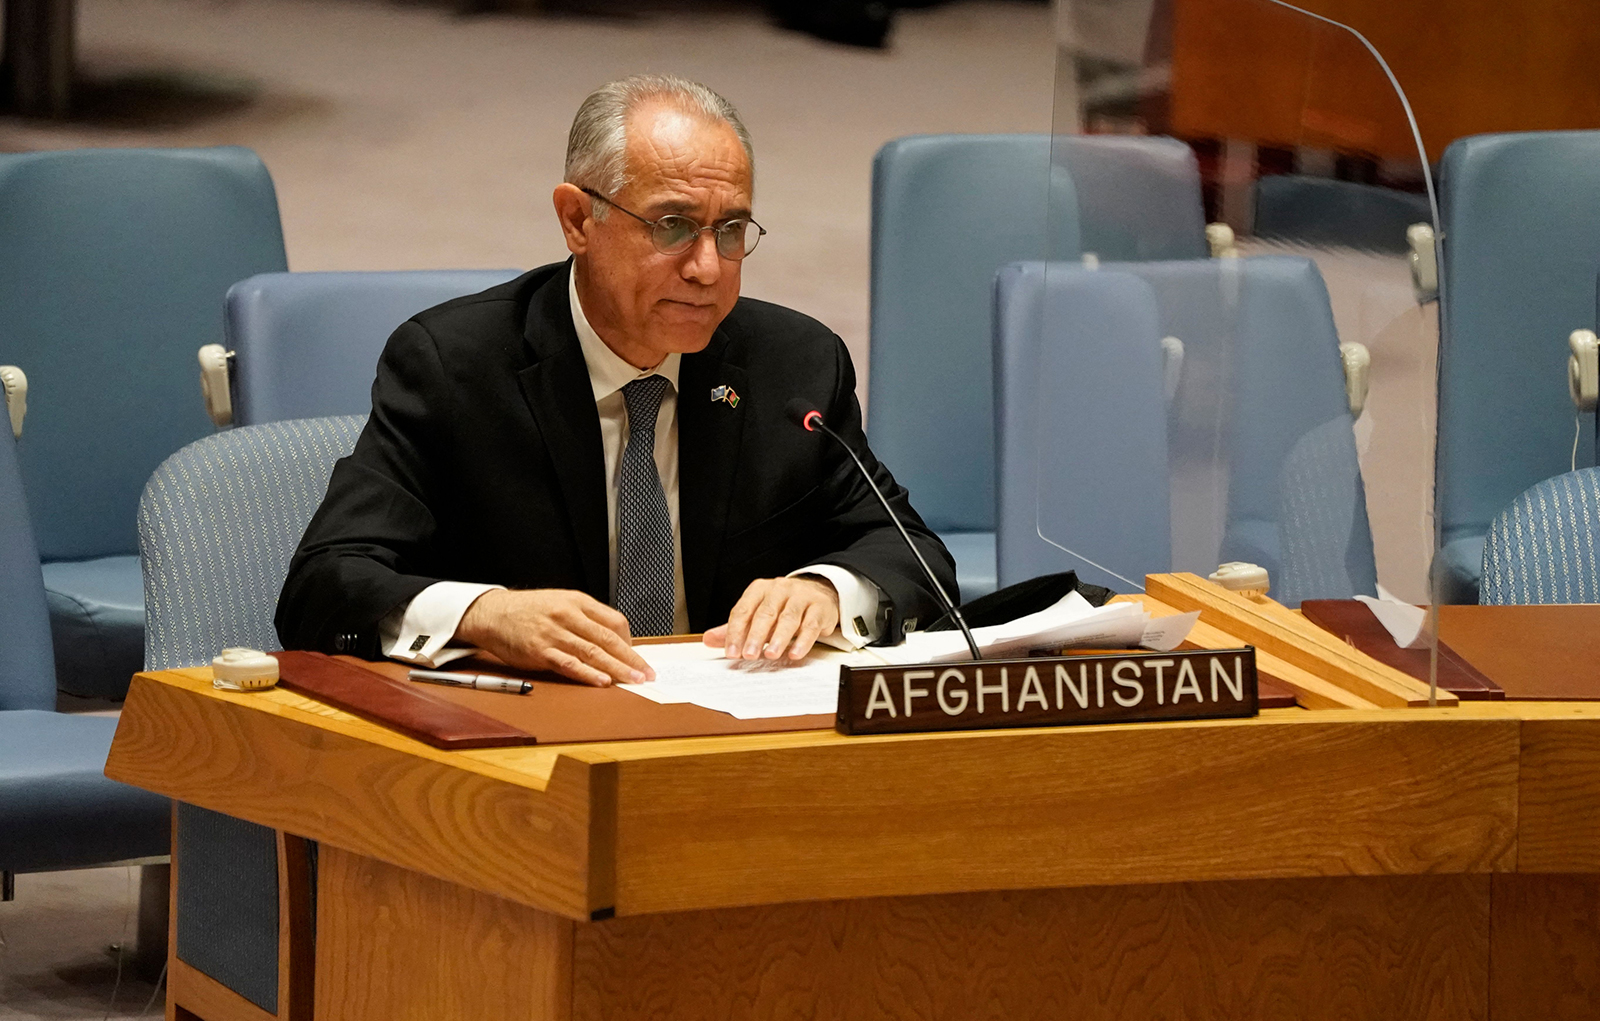 Permanent Representative of Afghanistan to the United Nations, Ghulam M. Isaczai speaks during a UN security council meeting on Afghanistan on August 16 at the United Nations in New York.